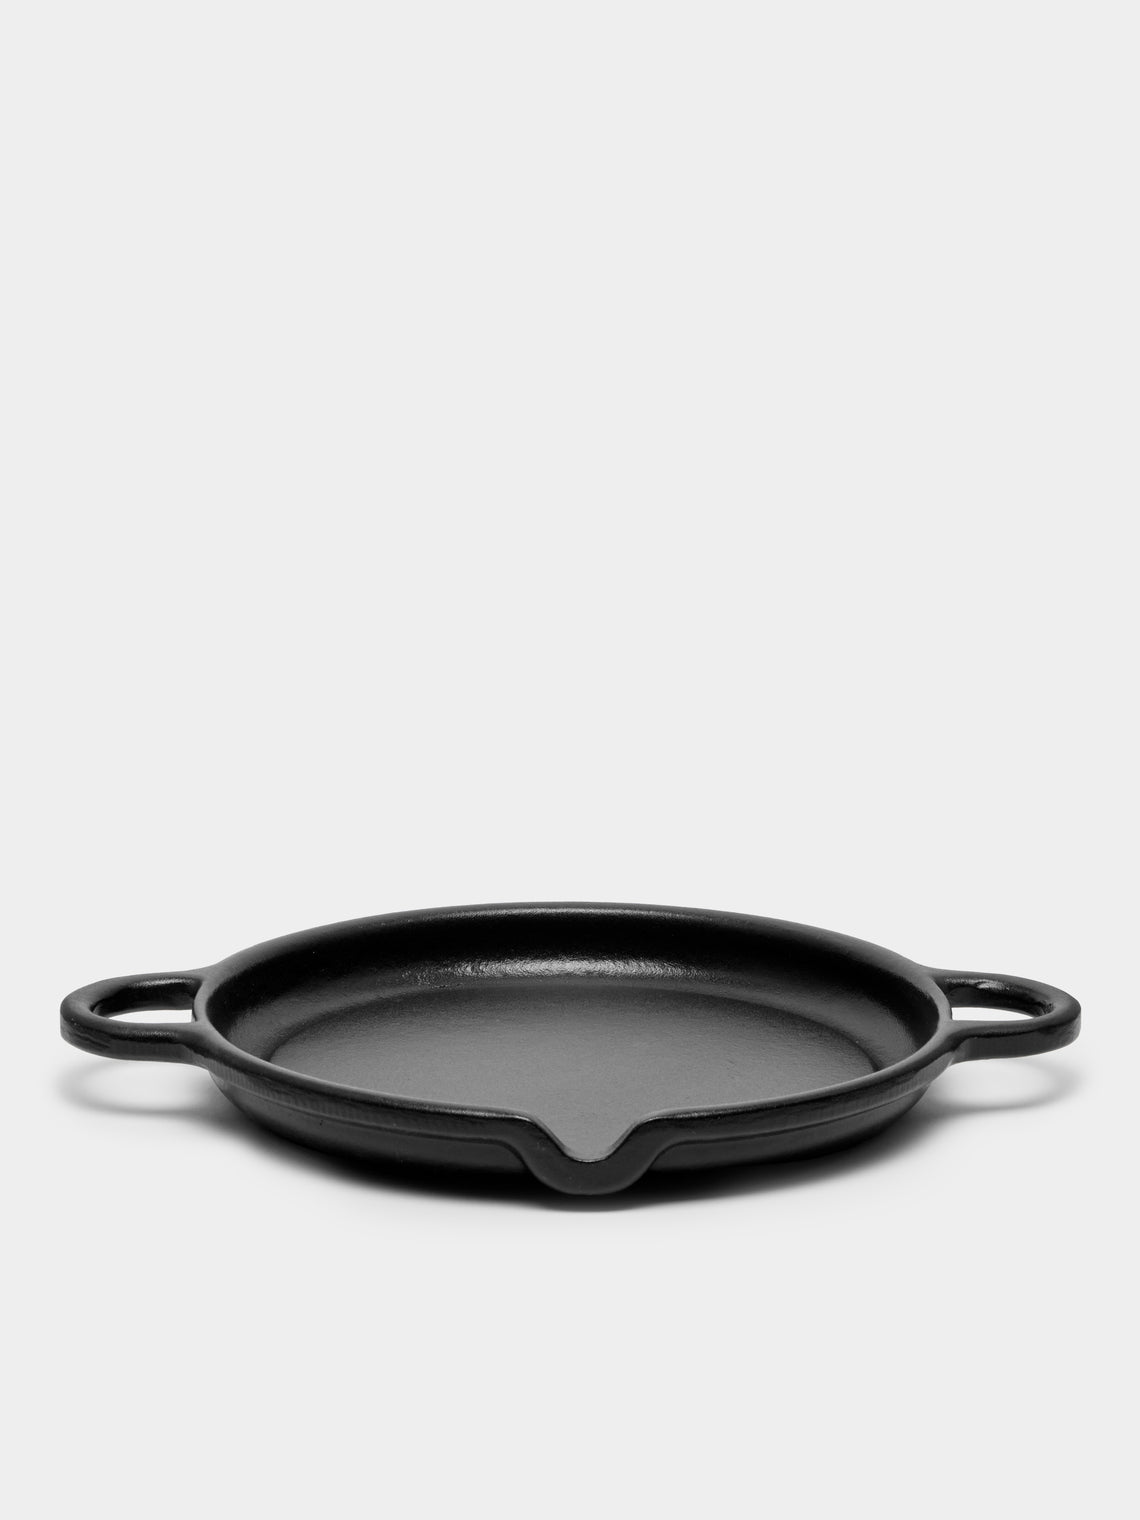 Antique and Vintage - Mid-Century Carl Auböck for Ostovics Culinar Cast Iron Medium Shallow Pan -  - ABASK - 